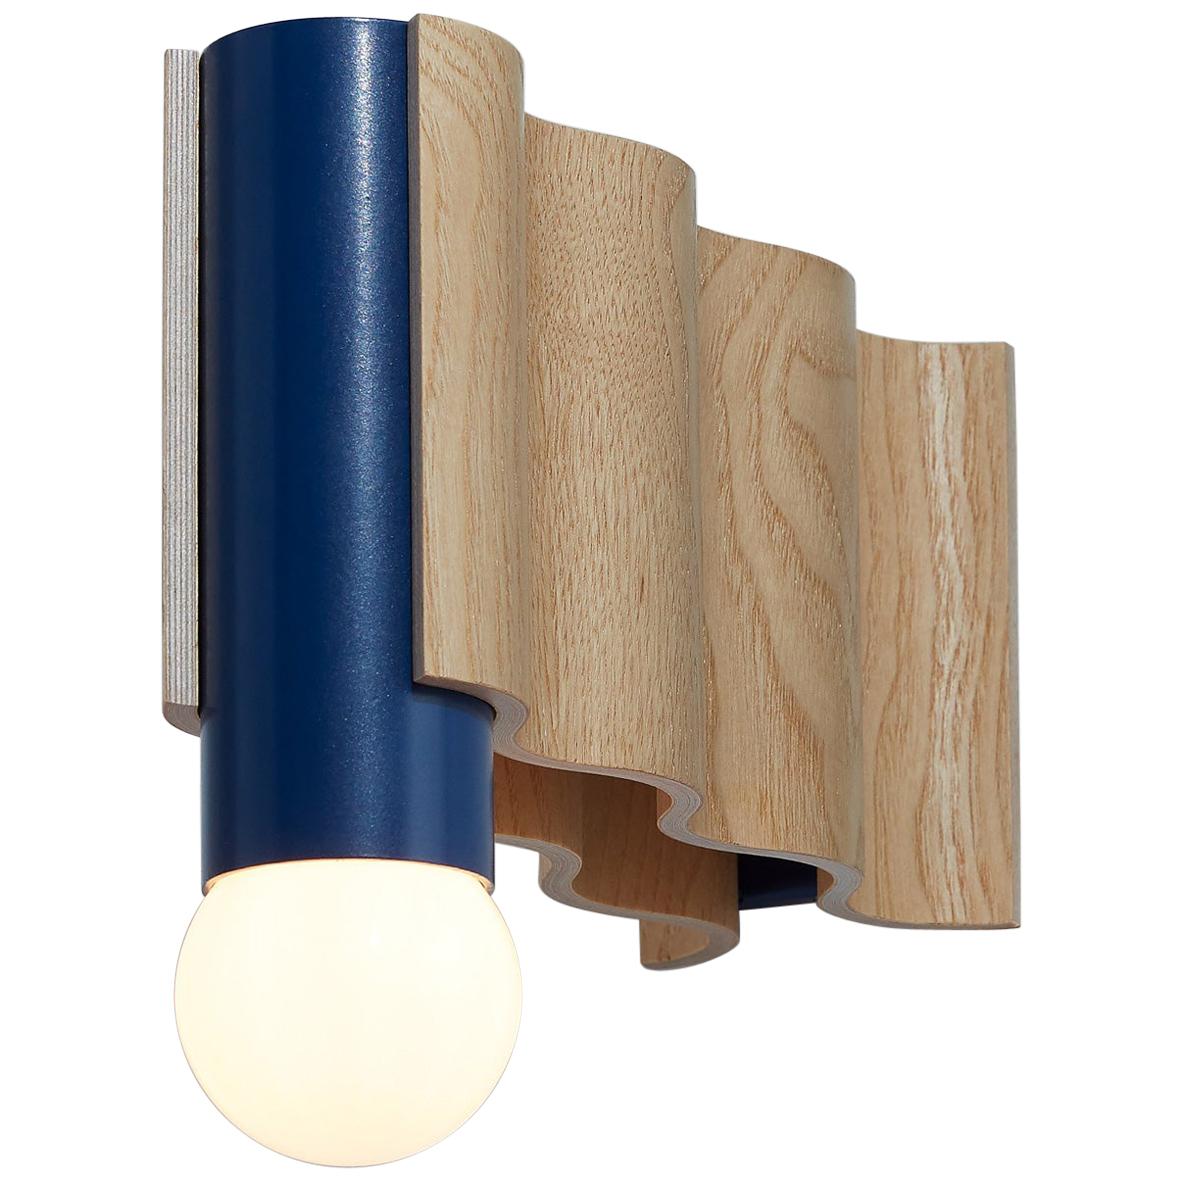 Single Corrugation Sconce or Wall Light in Natural Ash Veneer and Sapphire Blue For Sale